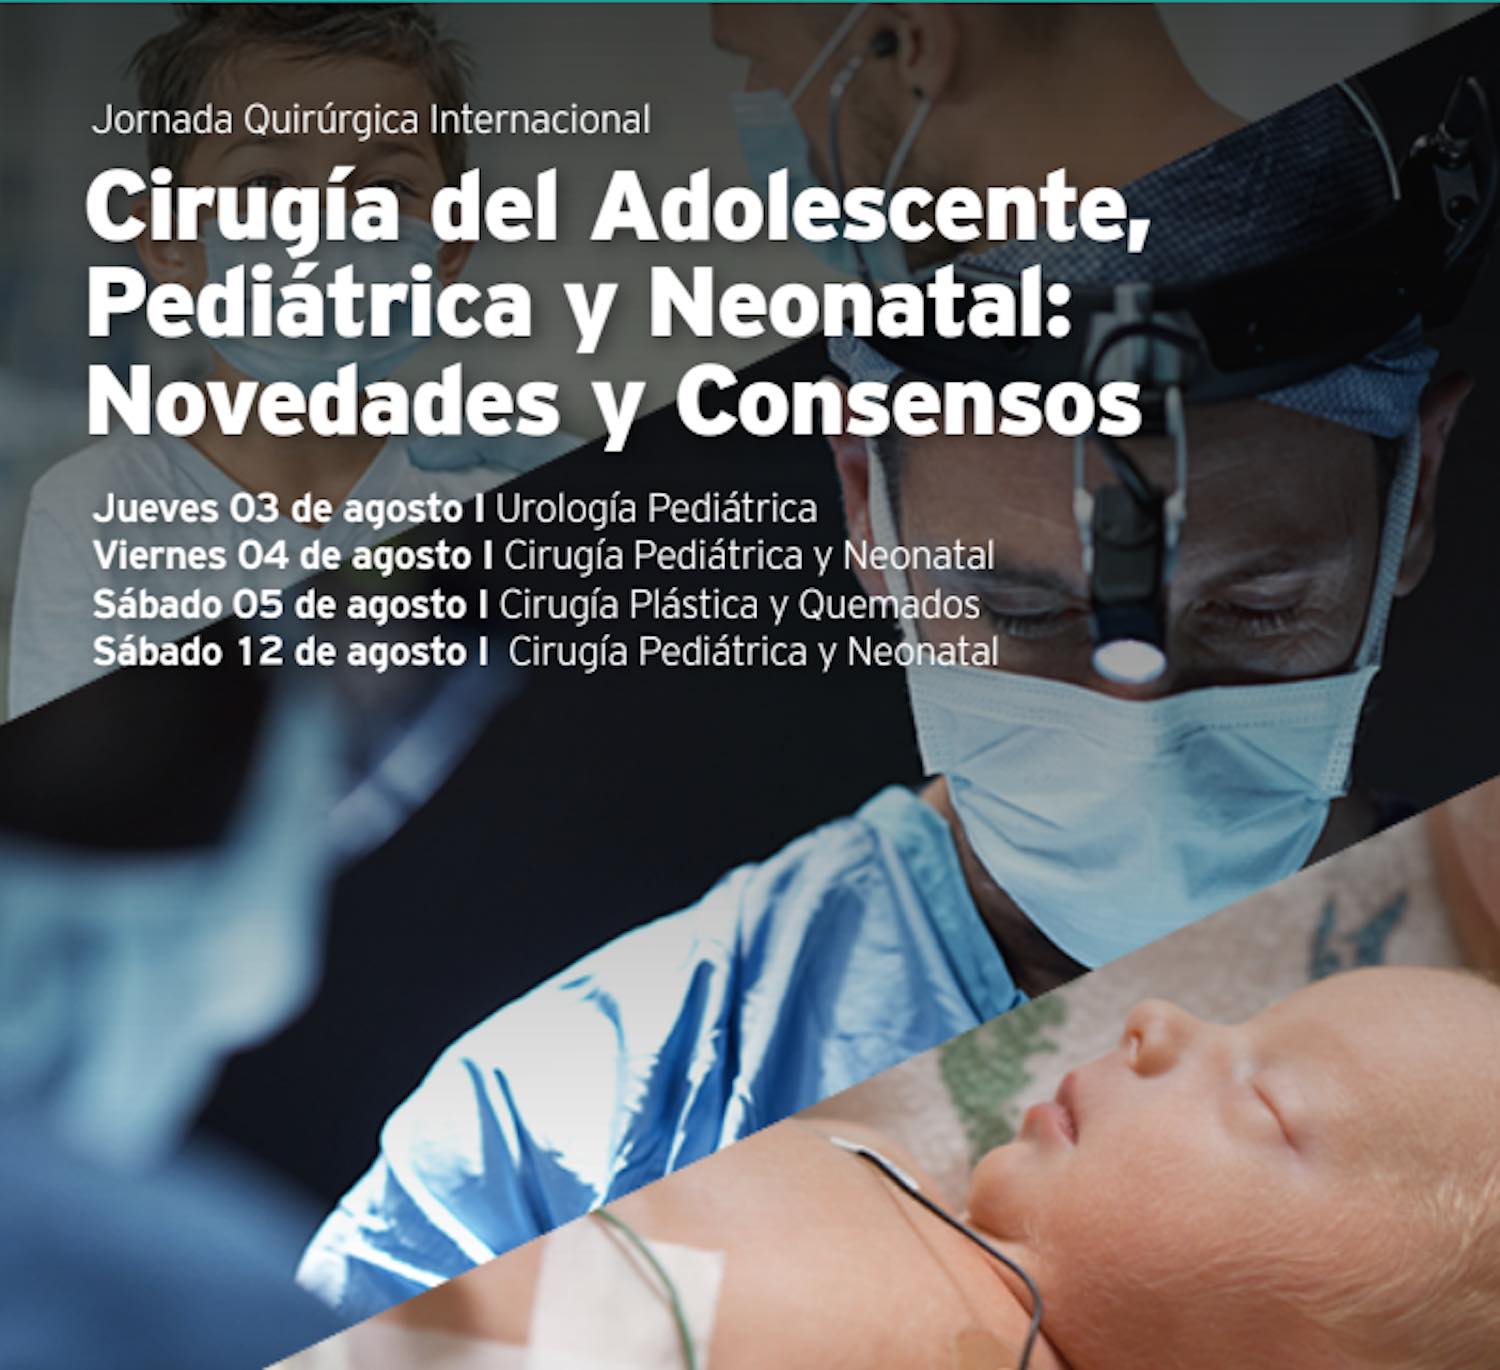 International Surgical Conference: Adolescent, Pediatric and Neonatal Surgery